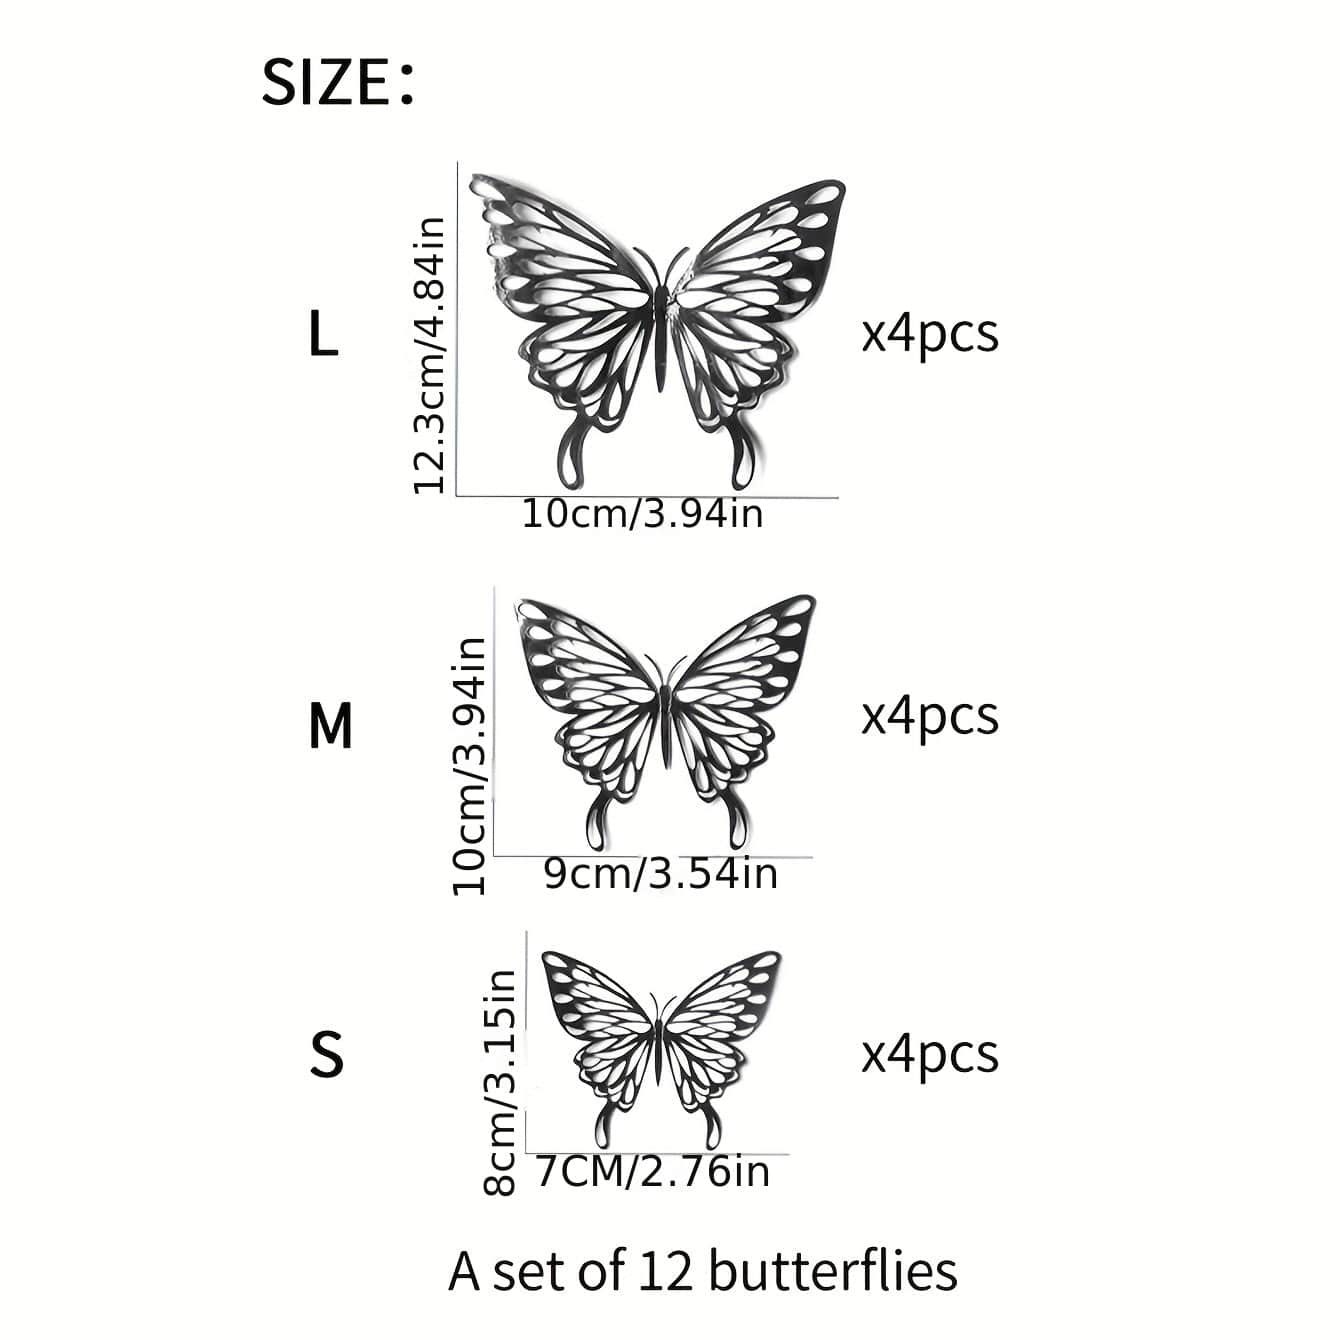 Black butterflies with their sizes